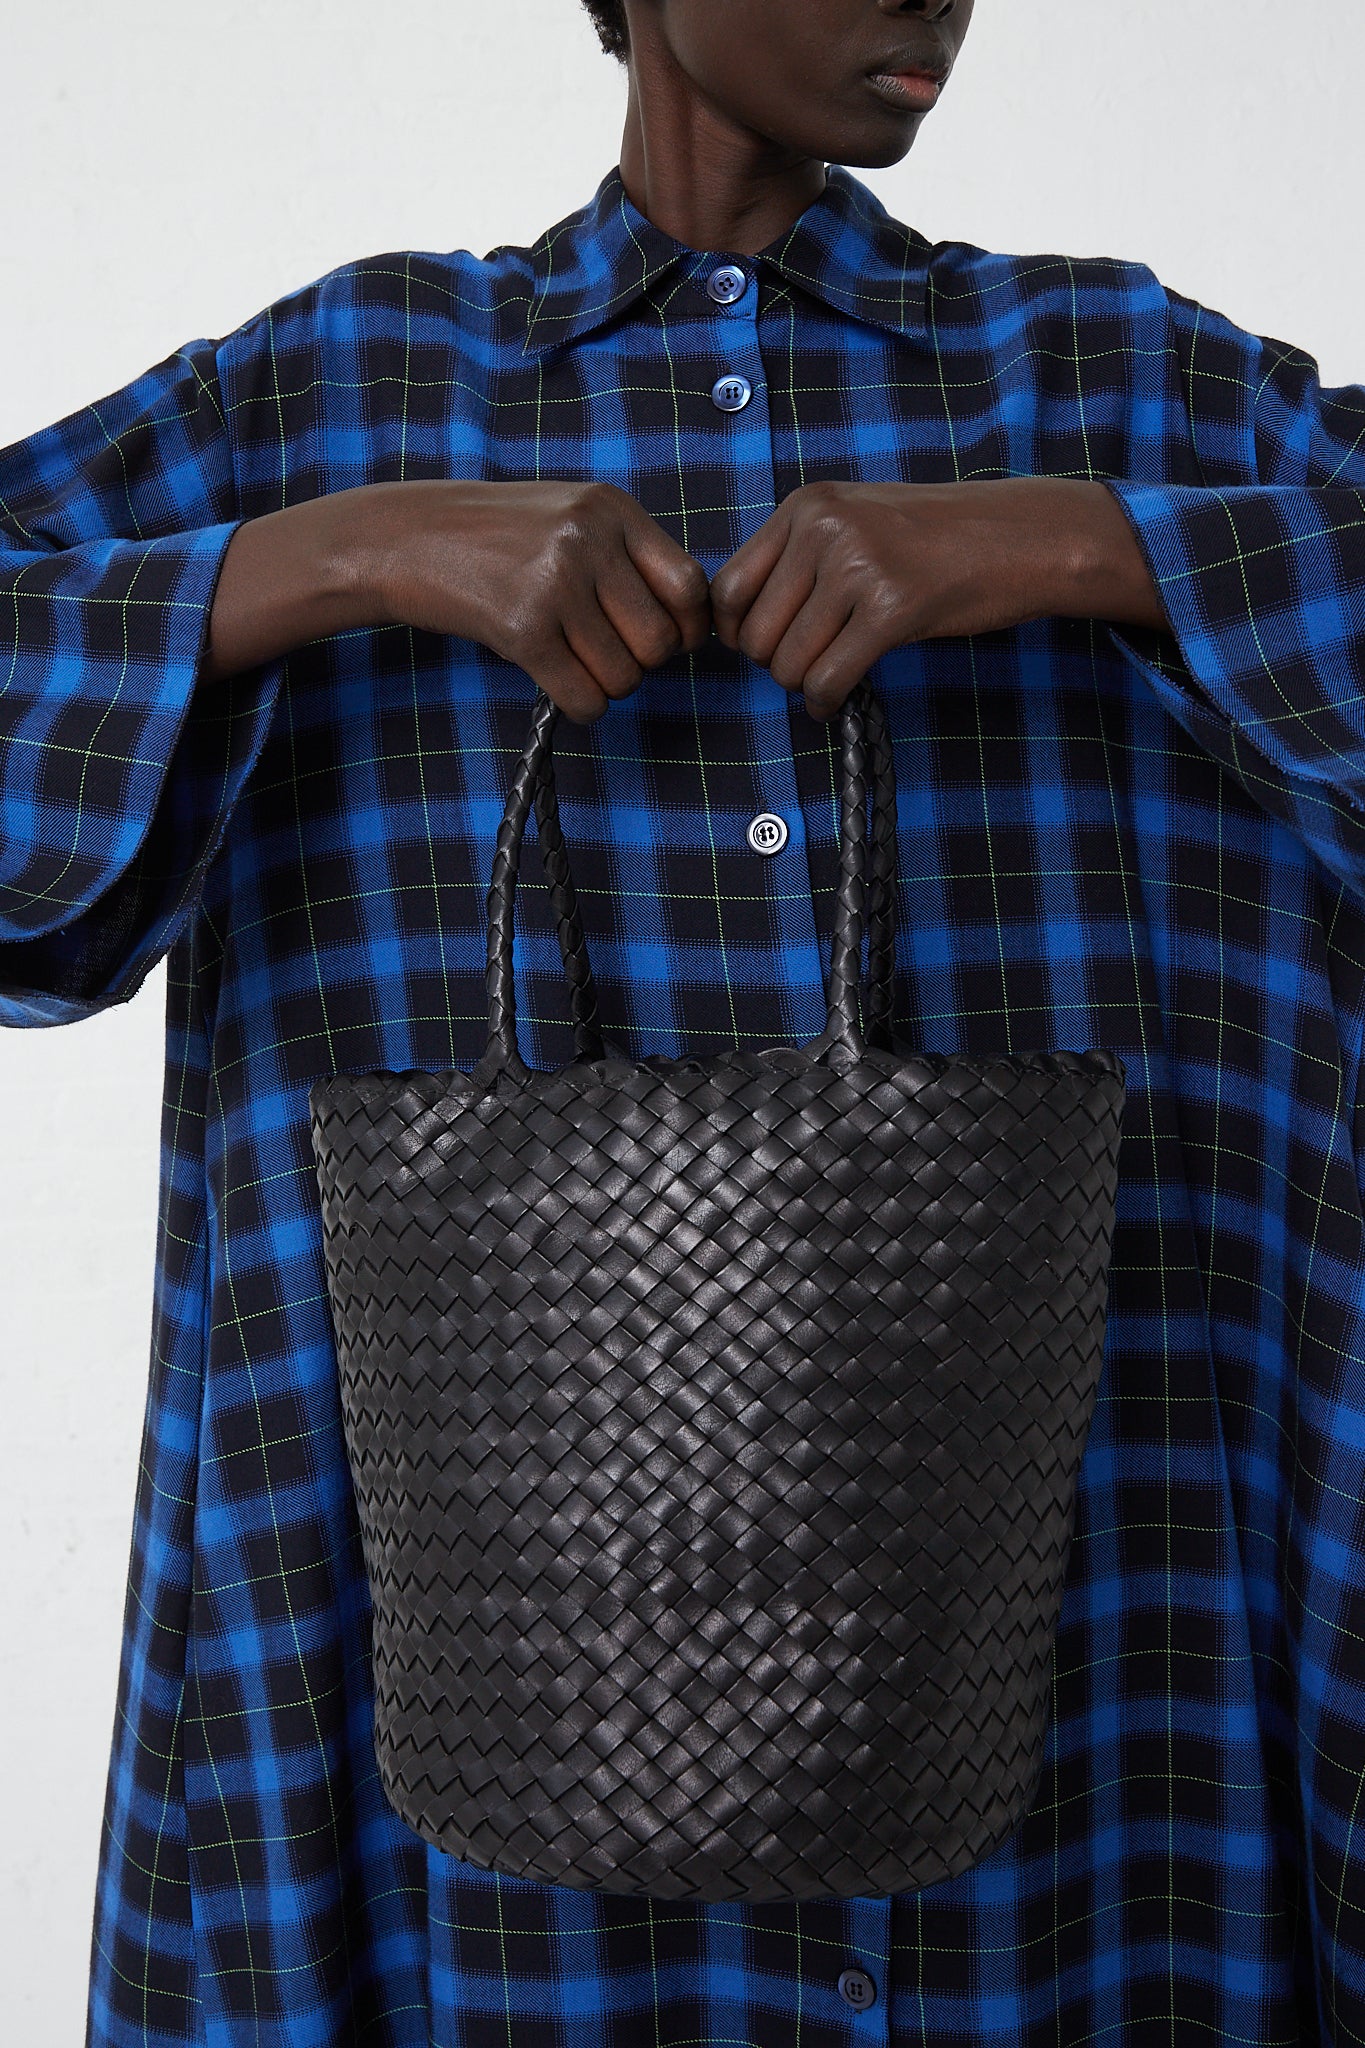 A woman in a plaid shirt holding a Dragon Diffusion Jacky Bucket Bag in Black.